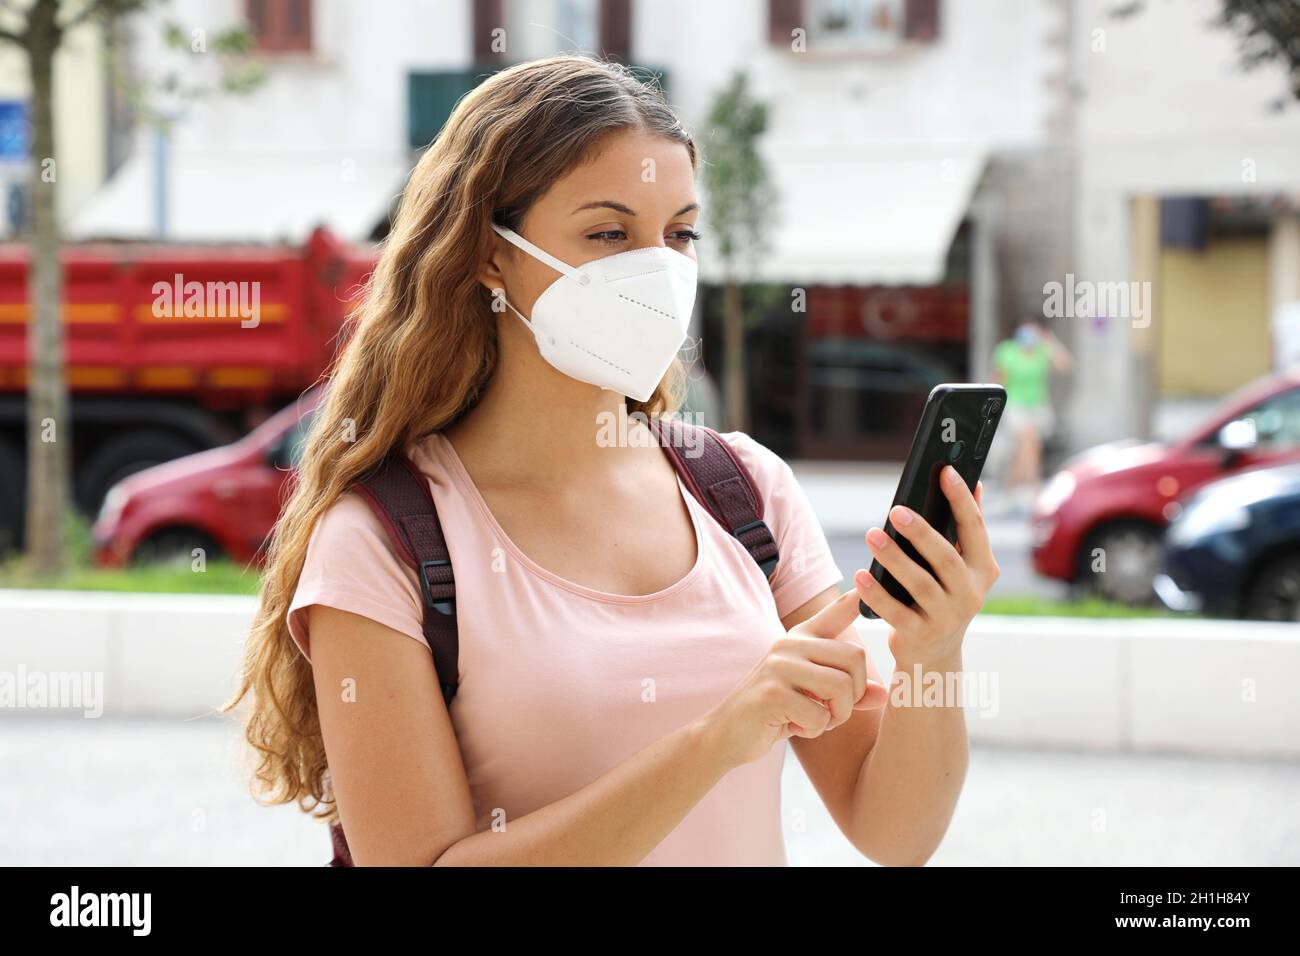 Brazilian woman with smart phone wearing face protective mask in the street Stock Photo